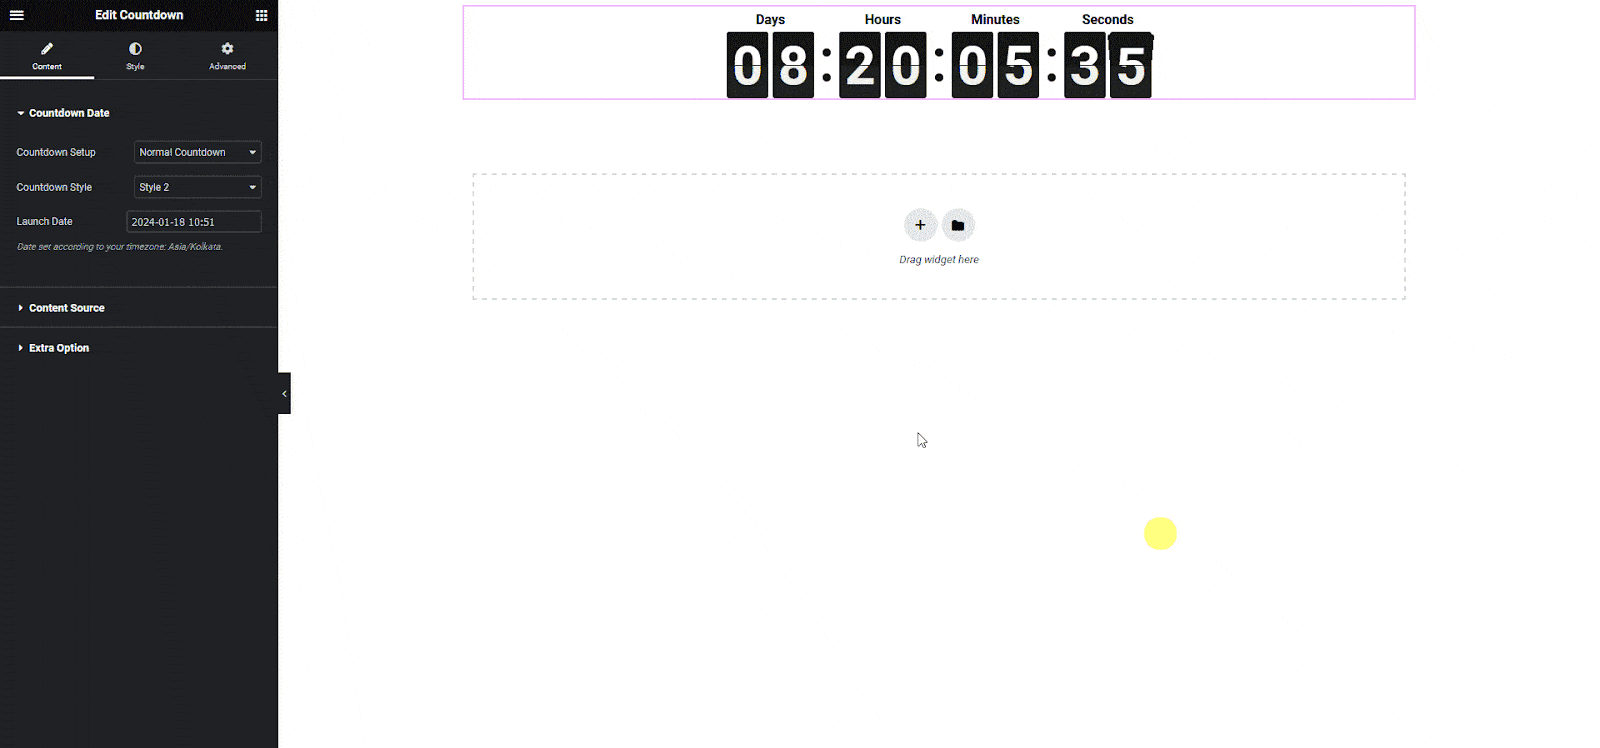 Countdown hide counters how to hide countdown days/hours/mins/seconds in elementor countdown timer? From the plus addons for elementor